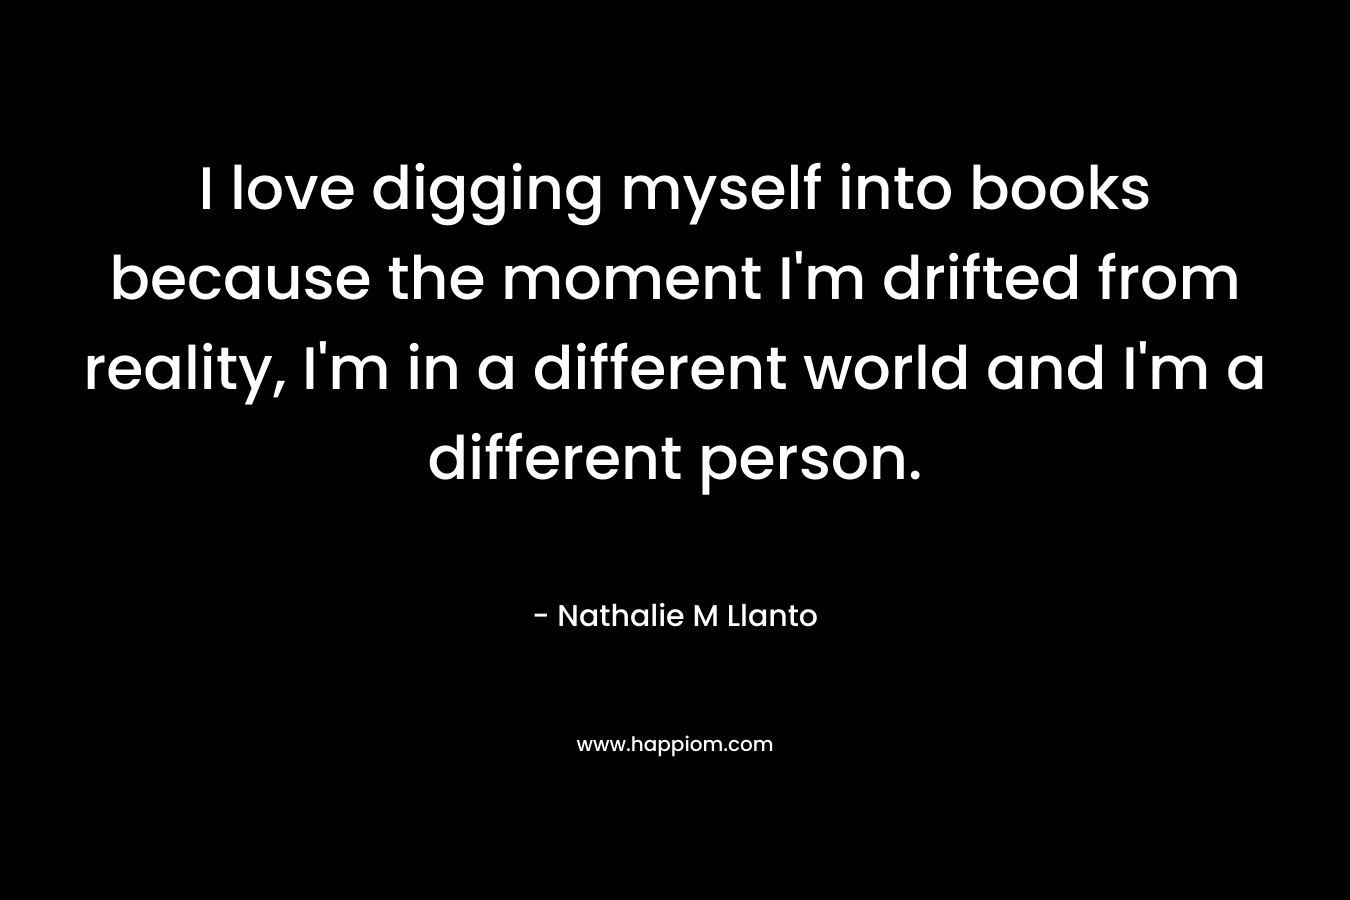 I love digging myself into books because the moment I’m drifted from reality, I’m in a different world and I’m a different person. – Nathalie M Llanto